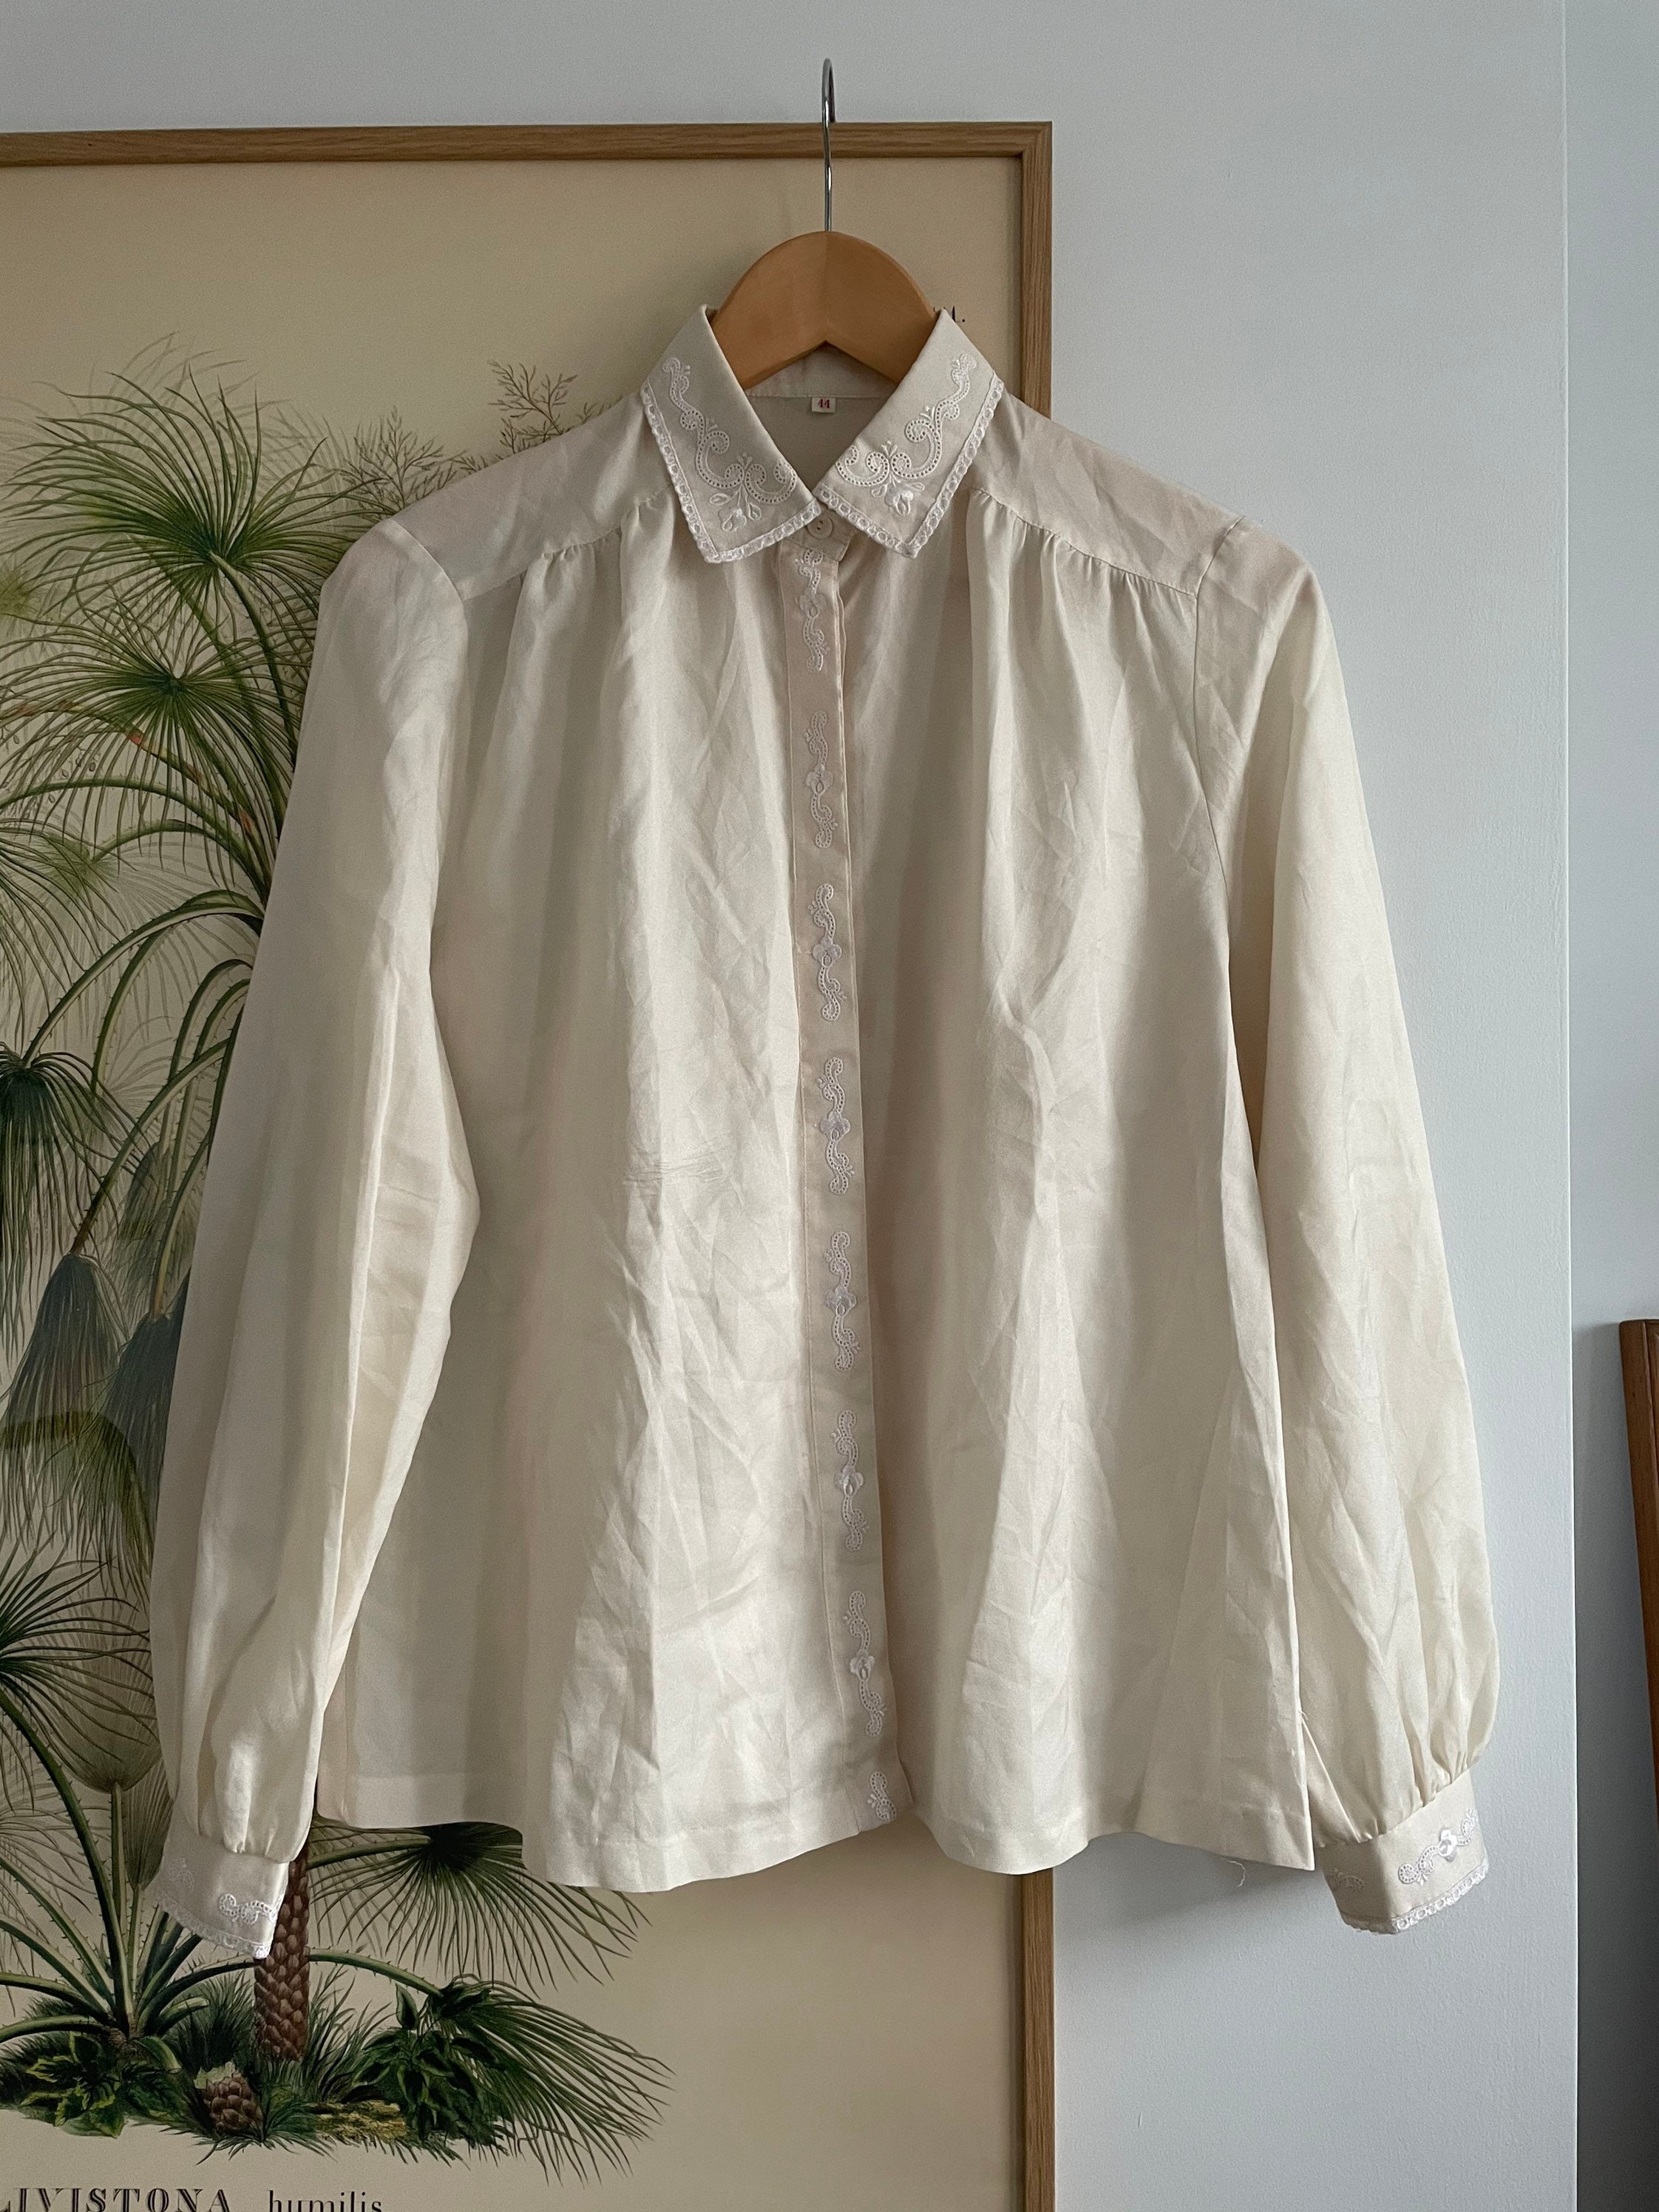 Vintage ivory blouse with embroidery & collar Uk12-14 | Etsy